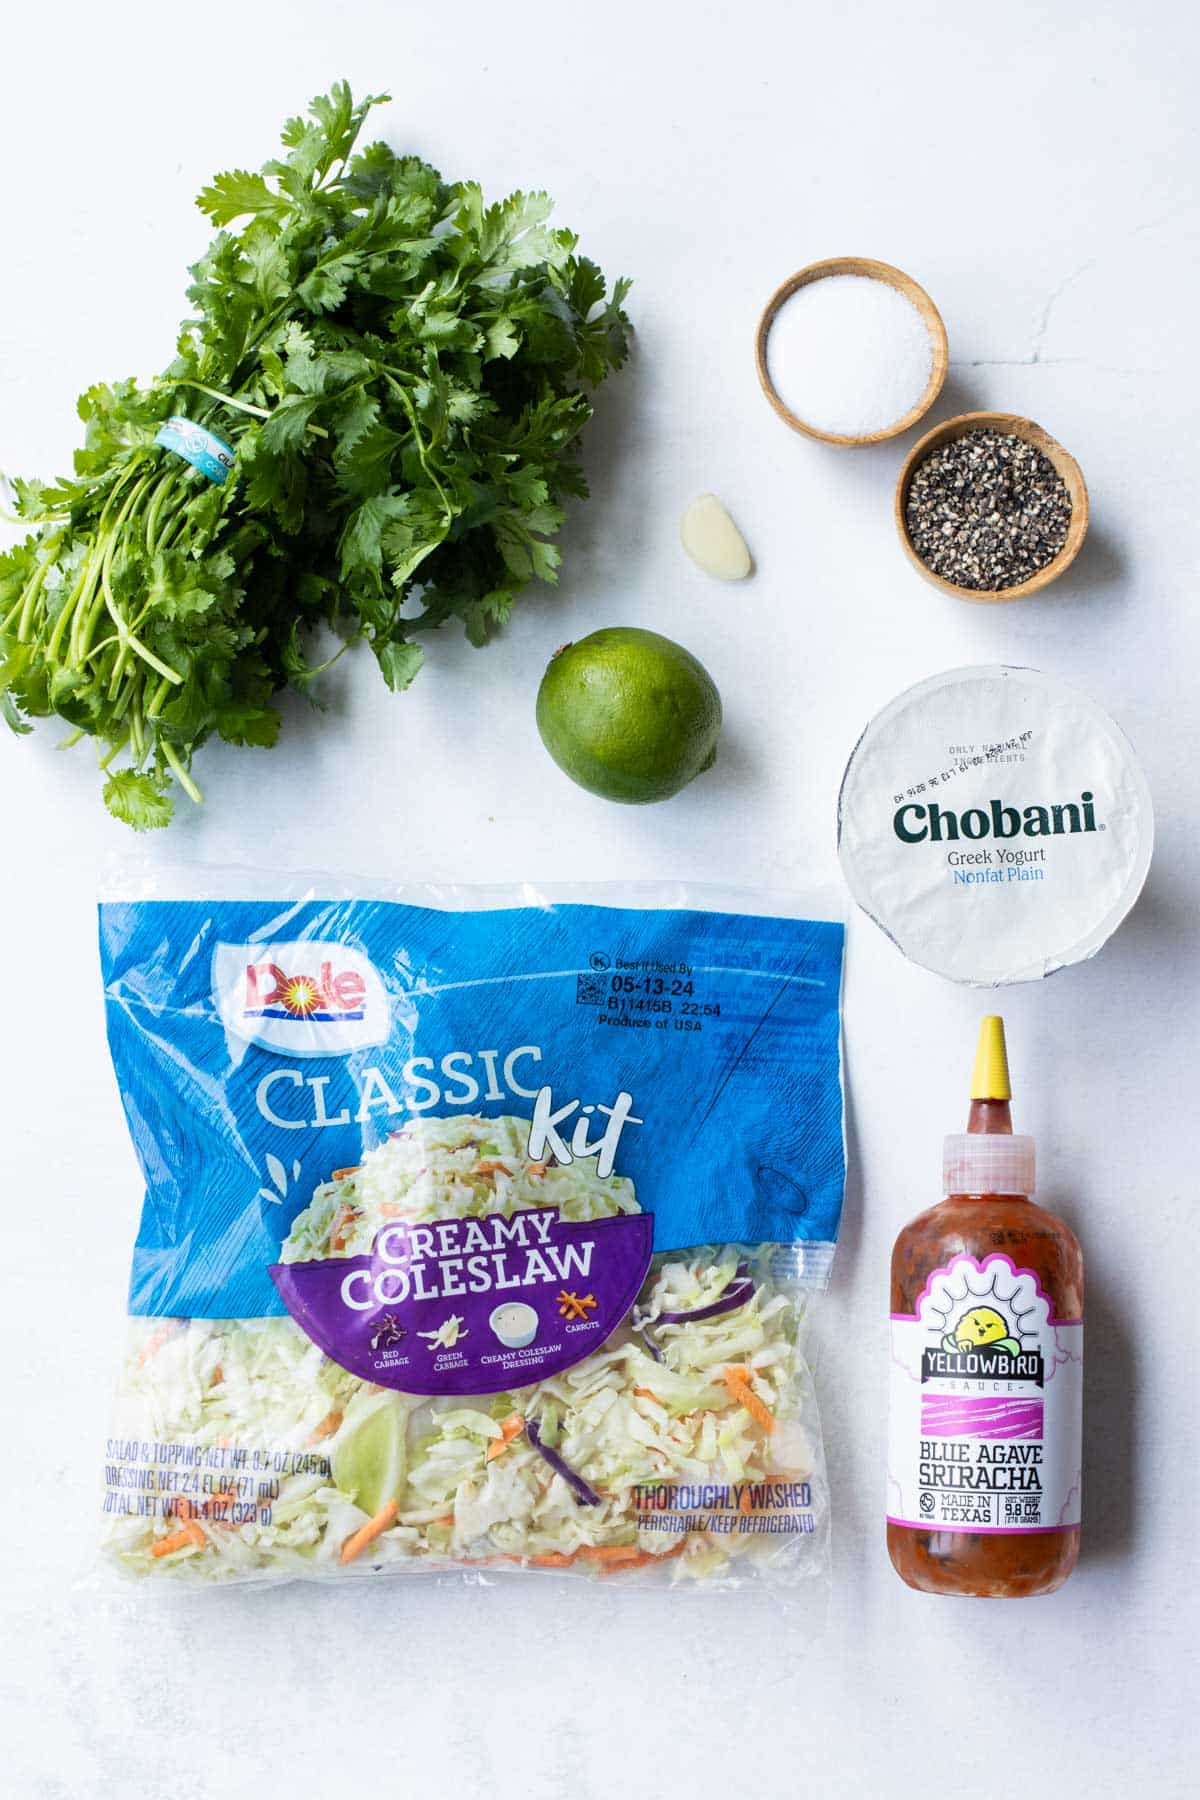 Coleslaw mix, cilantro, Greek yogurt, lime, and seasonings are the main ingredients for the cilantro slaw.